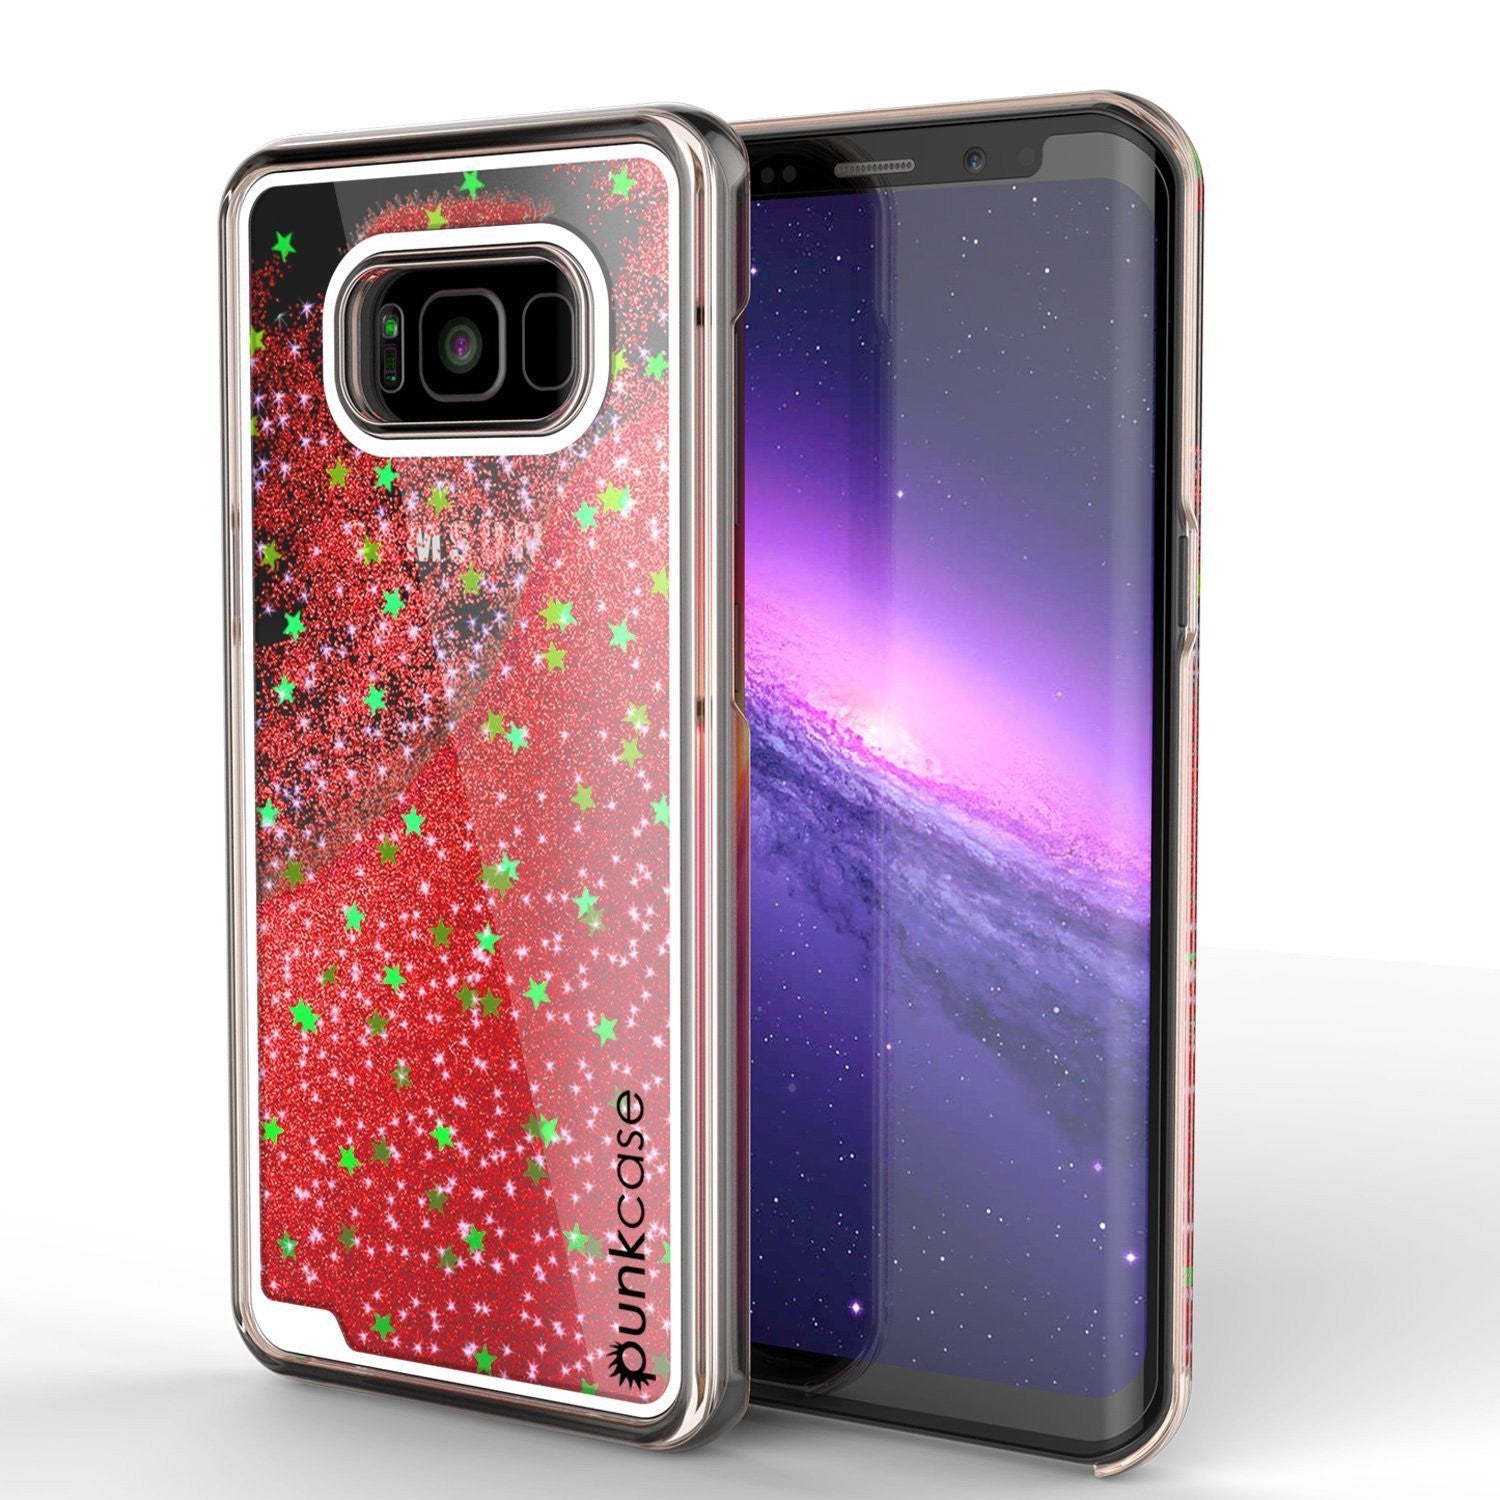 Galaxy S8 Case, Punkcase [Liquid Series] Protective Dual Layer Floating Glitter Cover + PunkShield Screen Protector for Samsung S8 [Red] (Color in image: Red)